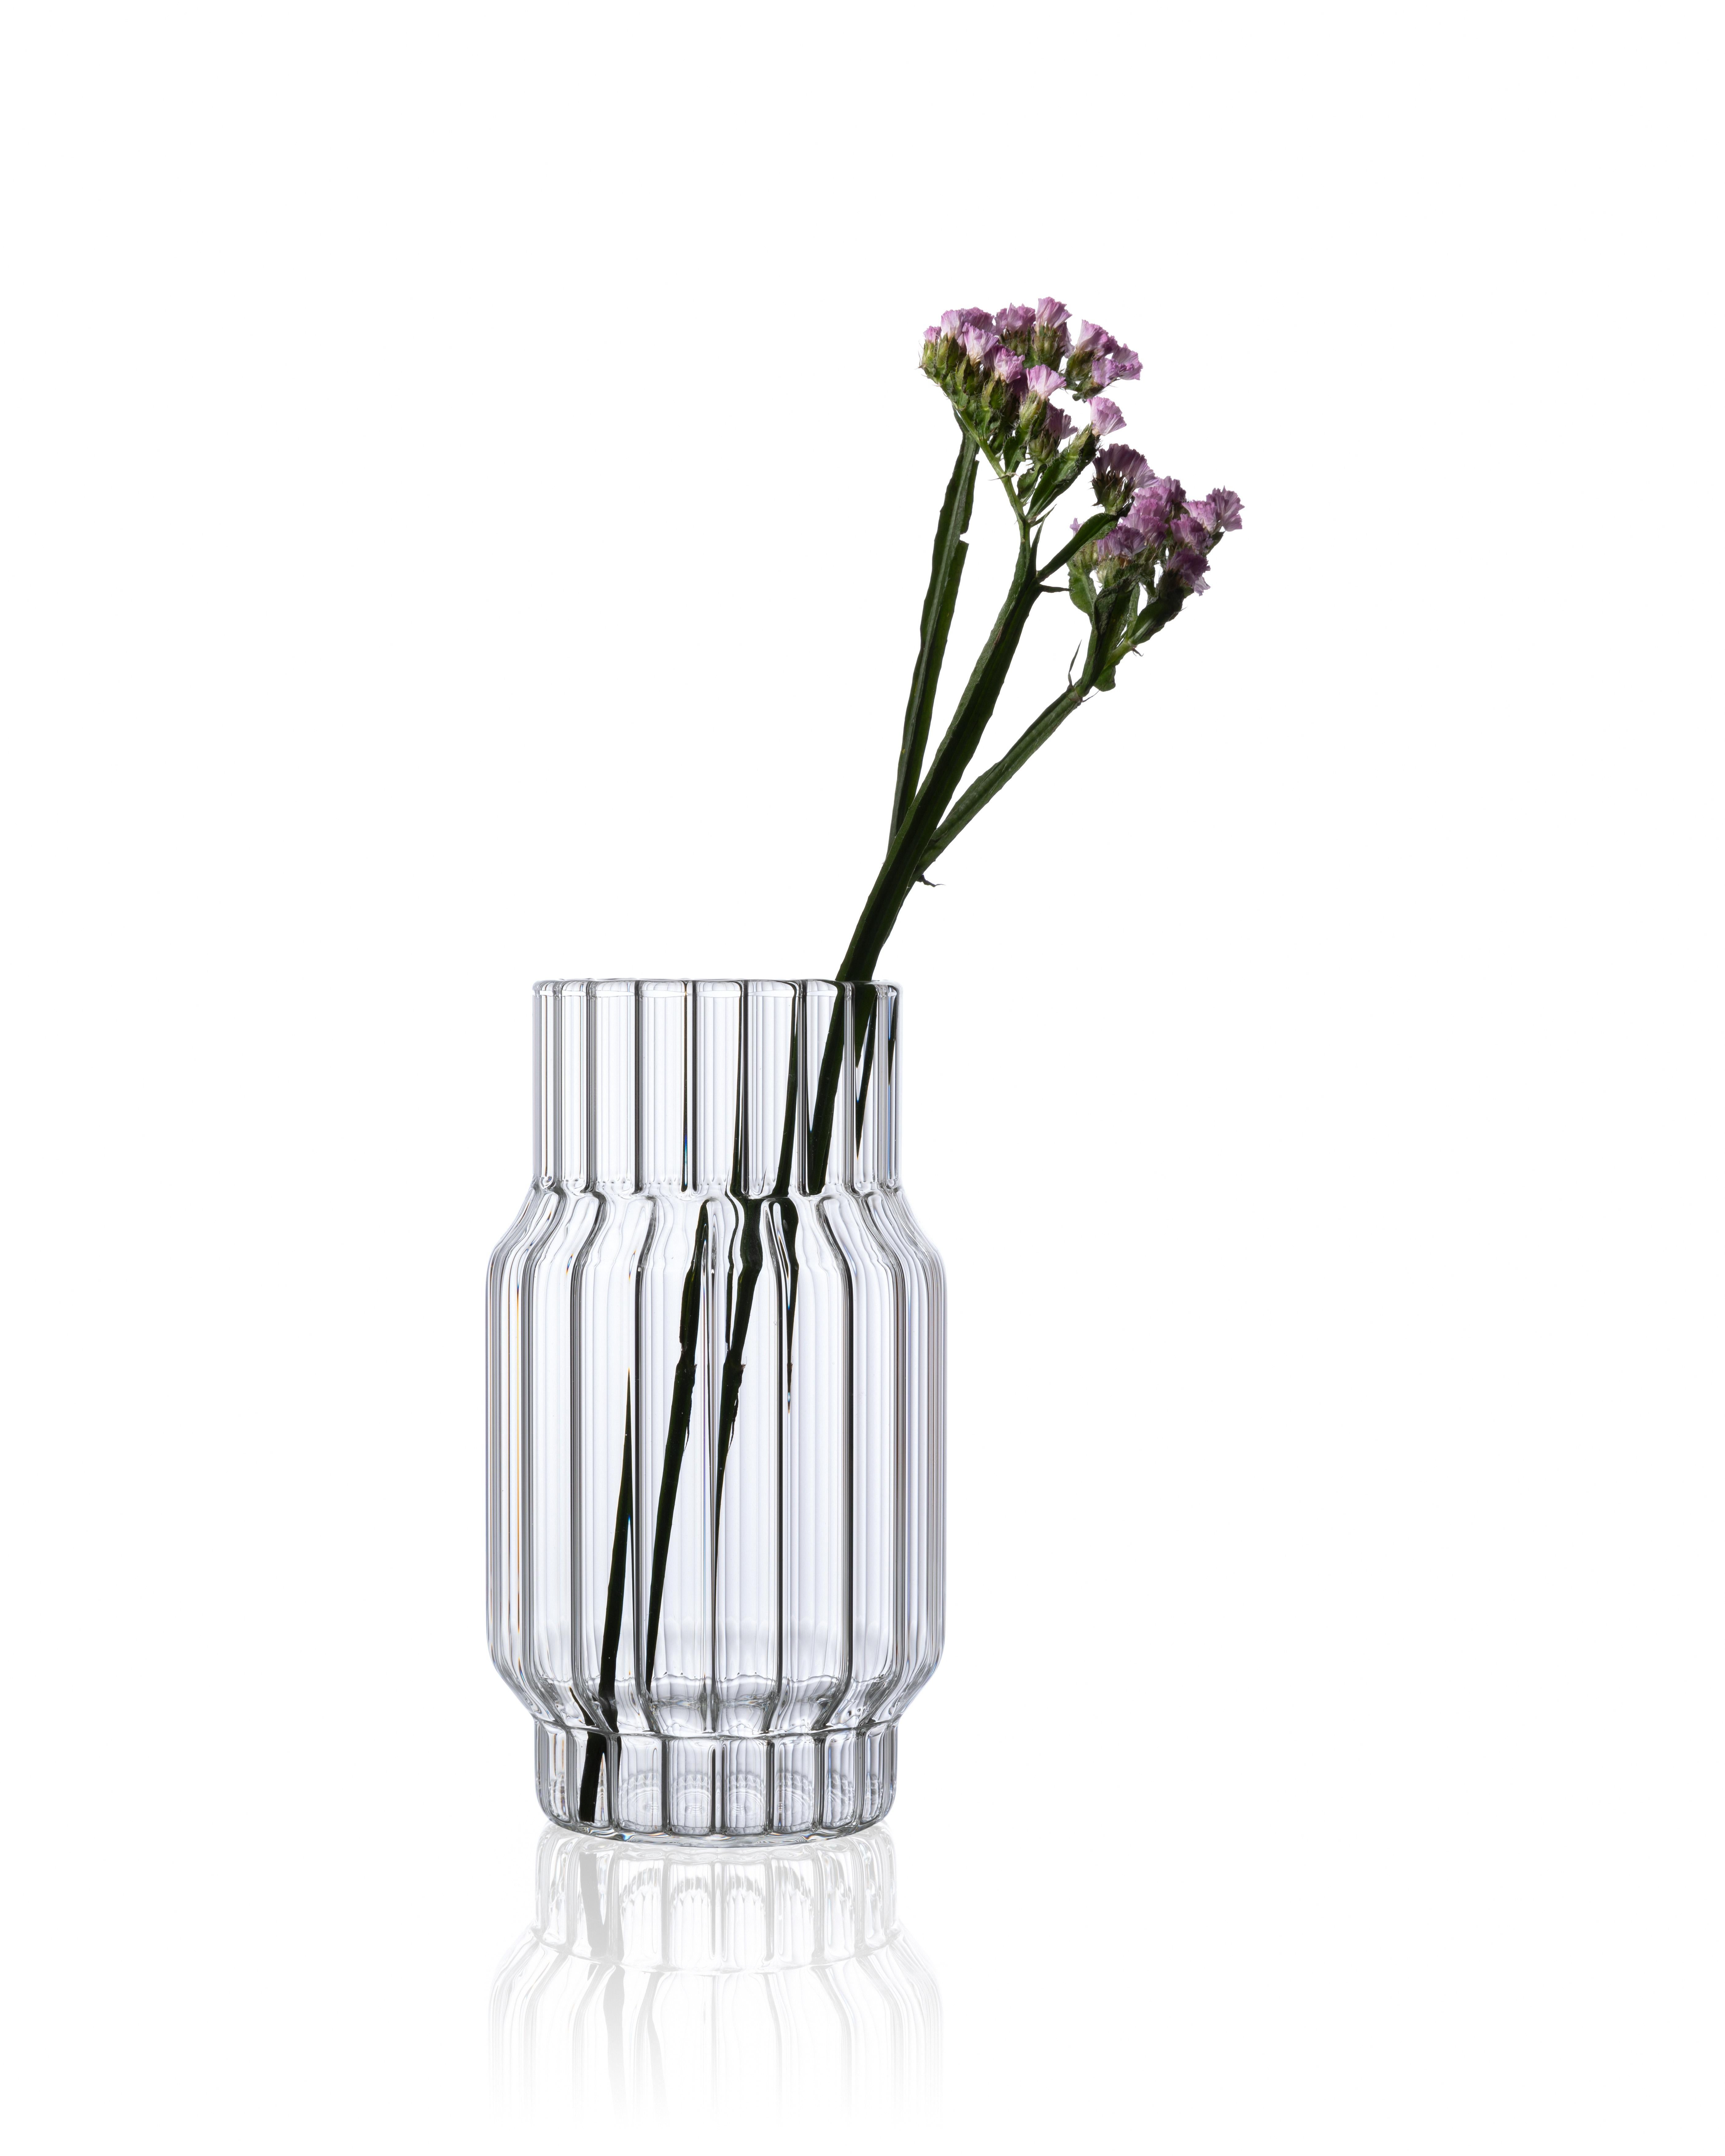 ALBANY MEDIUM VASE

The Albany Vase inverts tradition with intricate fluting detail on the interior. The strong architectural lines are an exercise in material studies and production techniques. Made without molds, the facets are hand-formed with